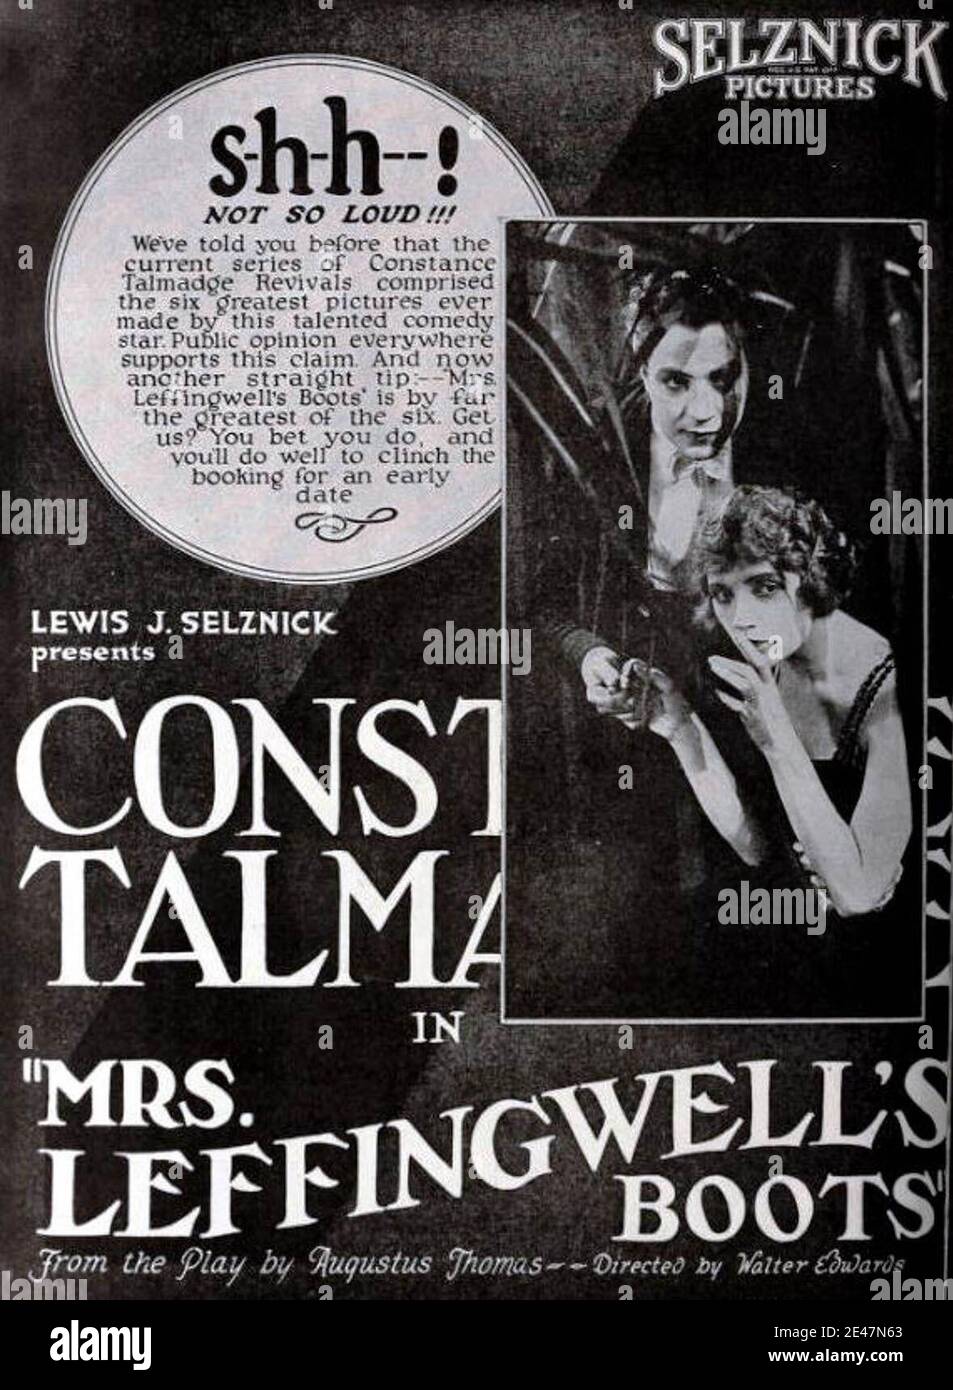 Still from the reissue of the American comedy romance film Mrs. Leffingwell's Boots (1918) with Constance Talmadge and Harrison Ford, on page 4 of the March 18, 1922 Exhibitors Herald. Stock Photo